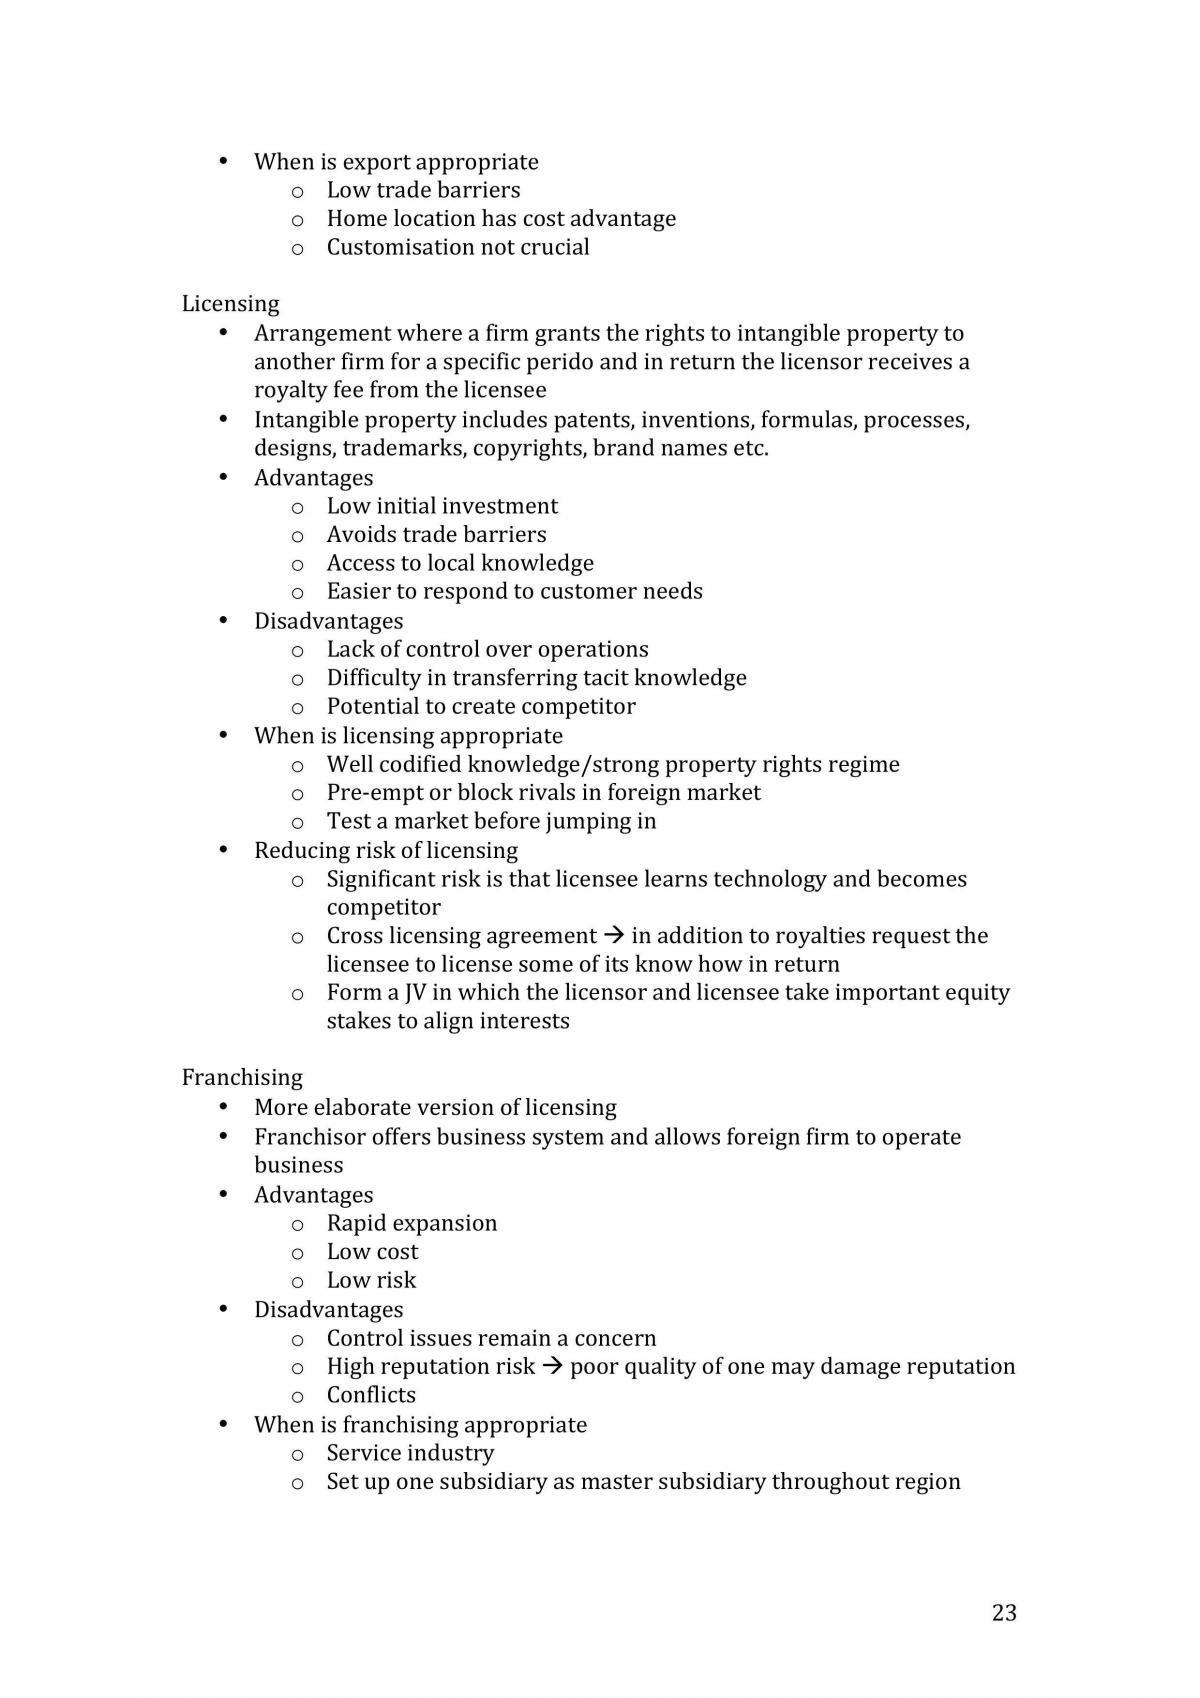 BBA340 Full Course Notes All Lectures All Chapters - Page 23